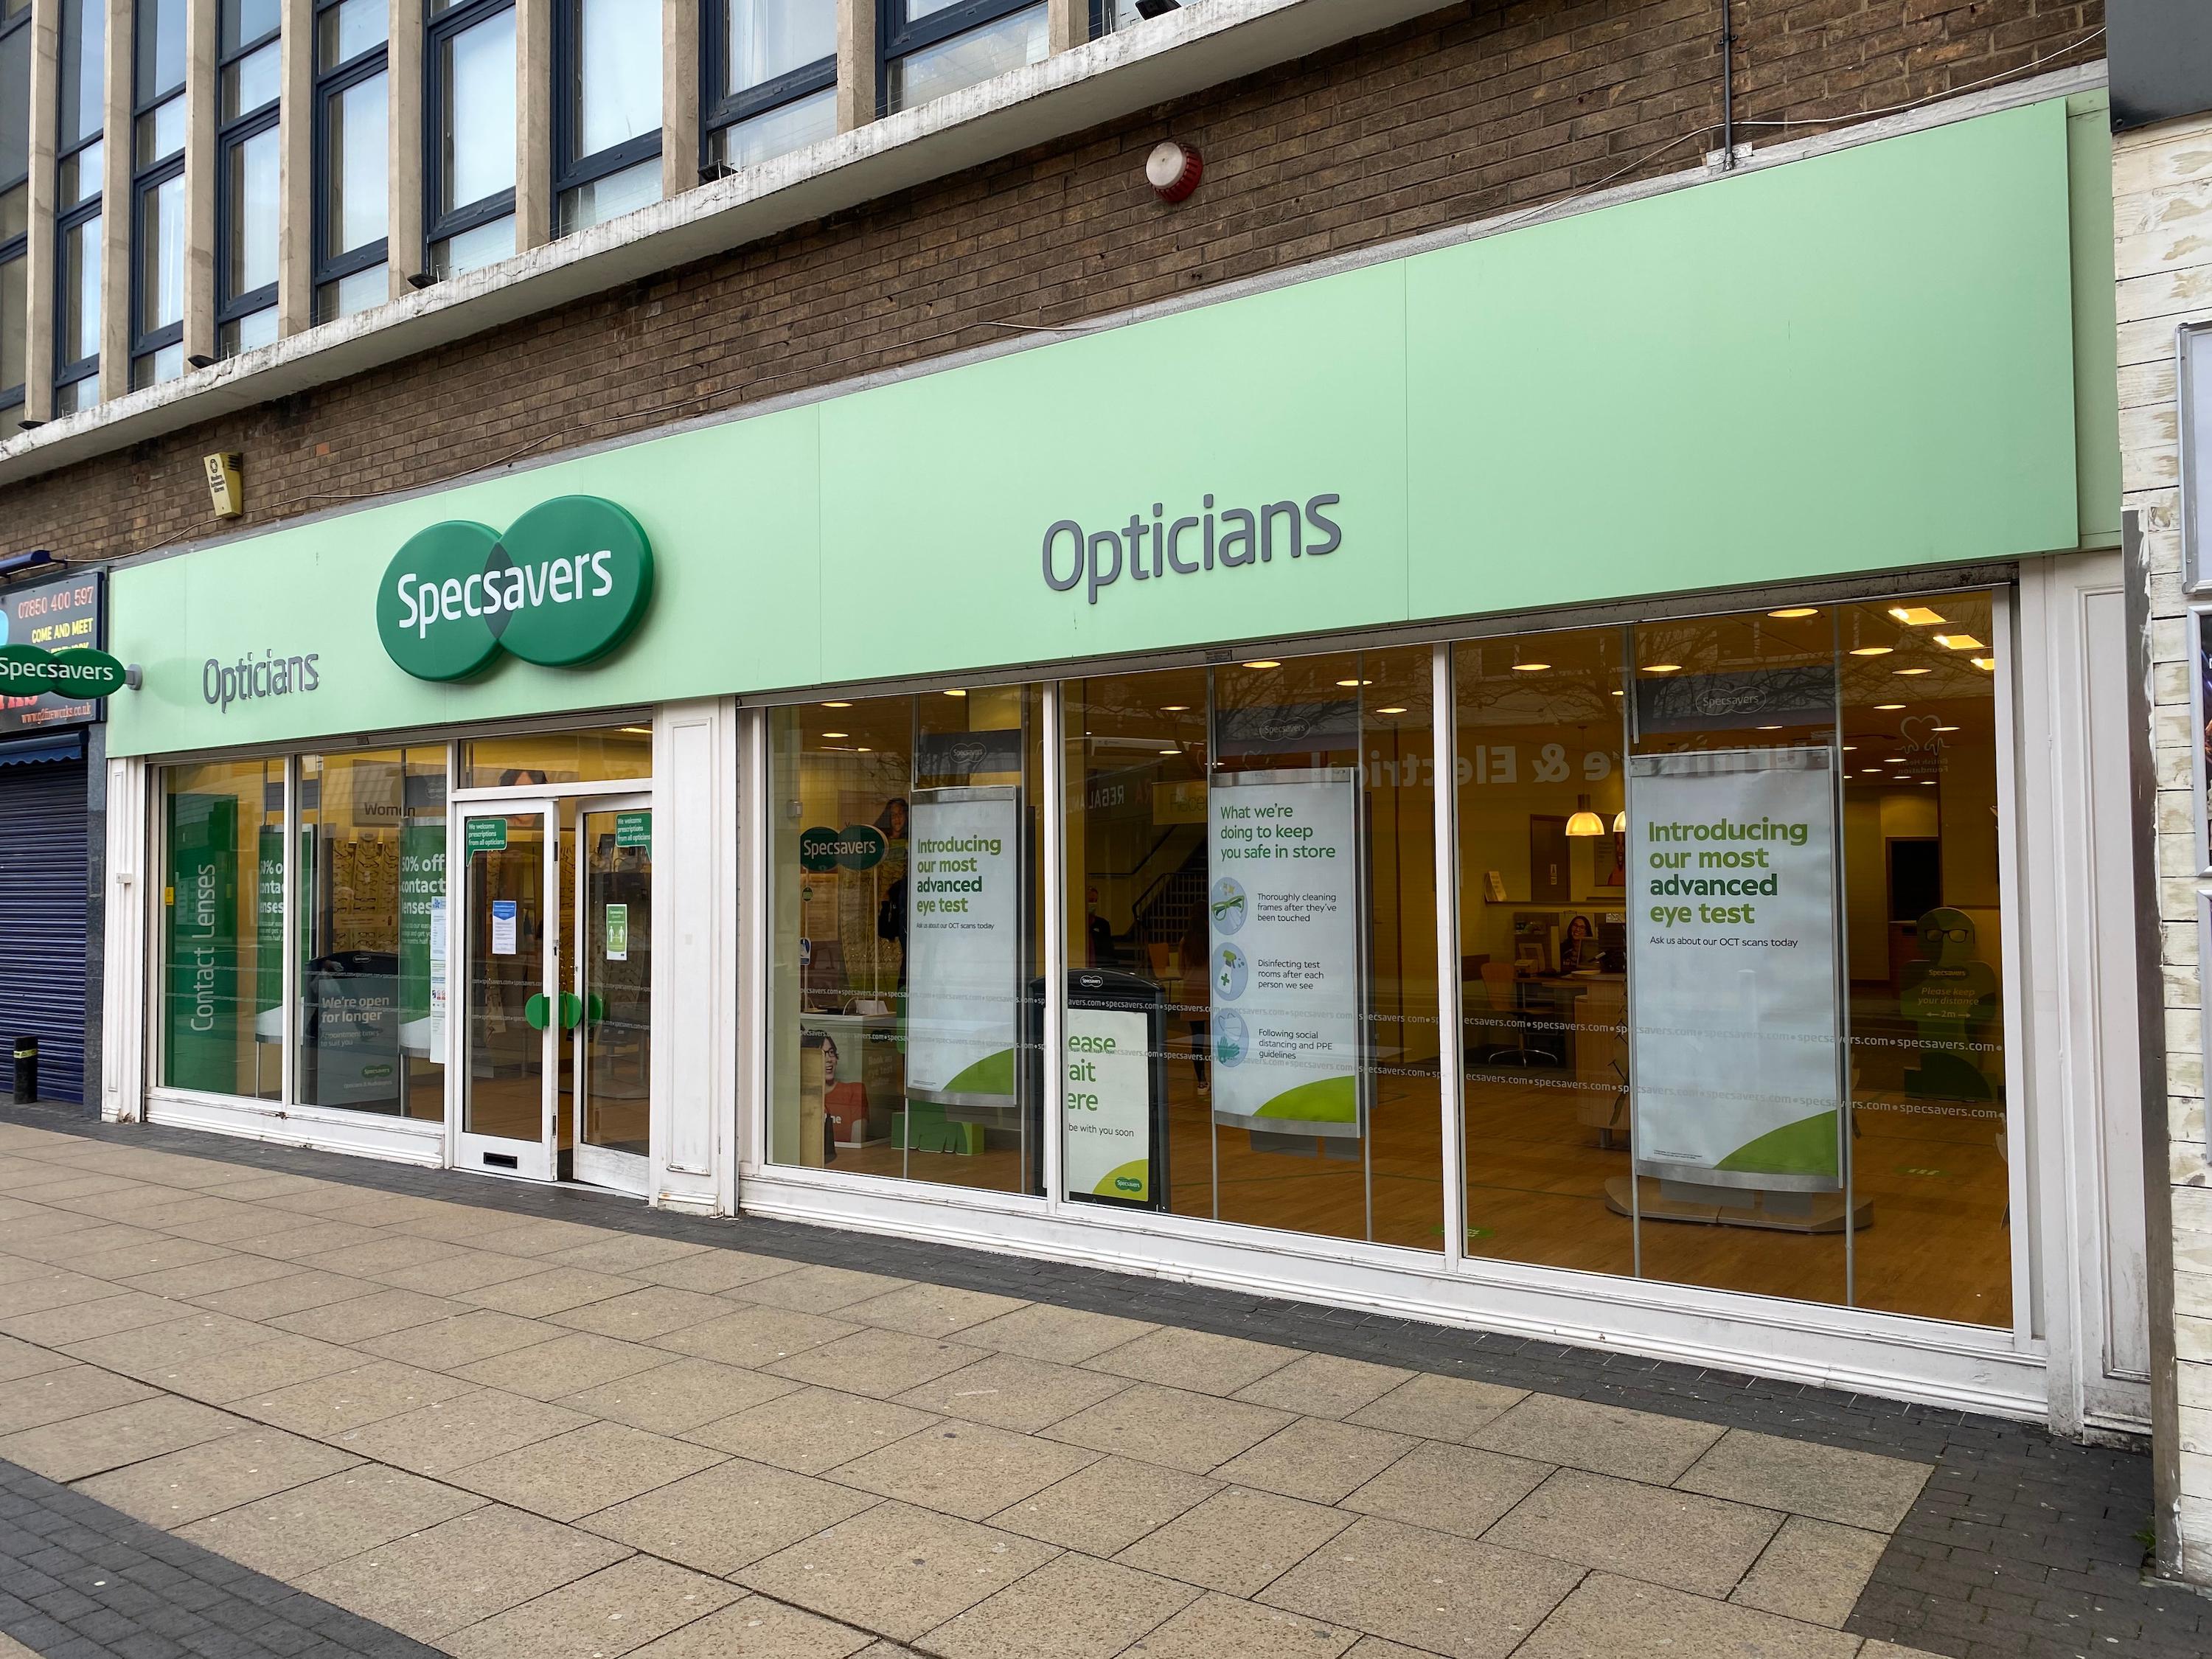 Specsavers Middlesbrough Specsavers Opticians and Audiologists - Middlesbrough Middlesborough 01642 222234